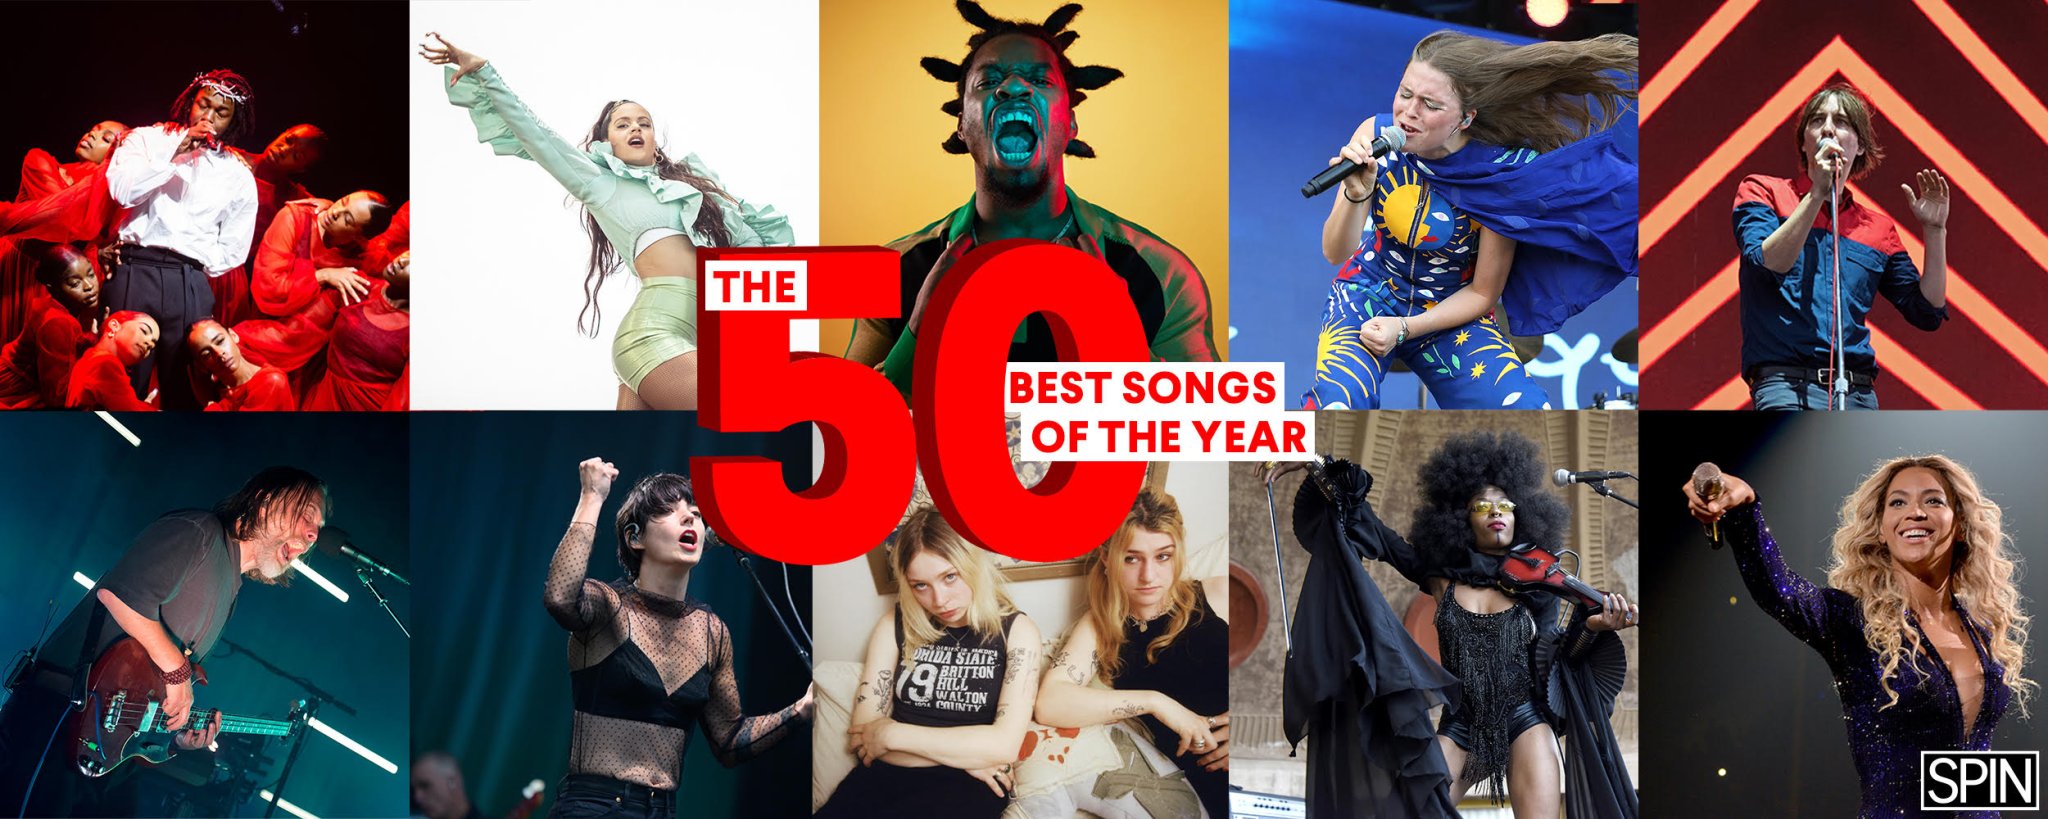 The 50 Best Songs of the Year - SPIN